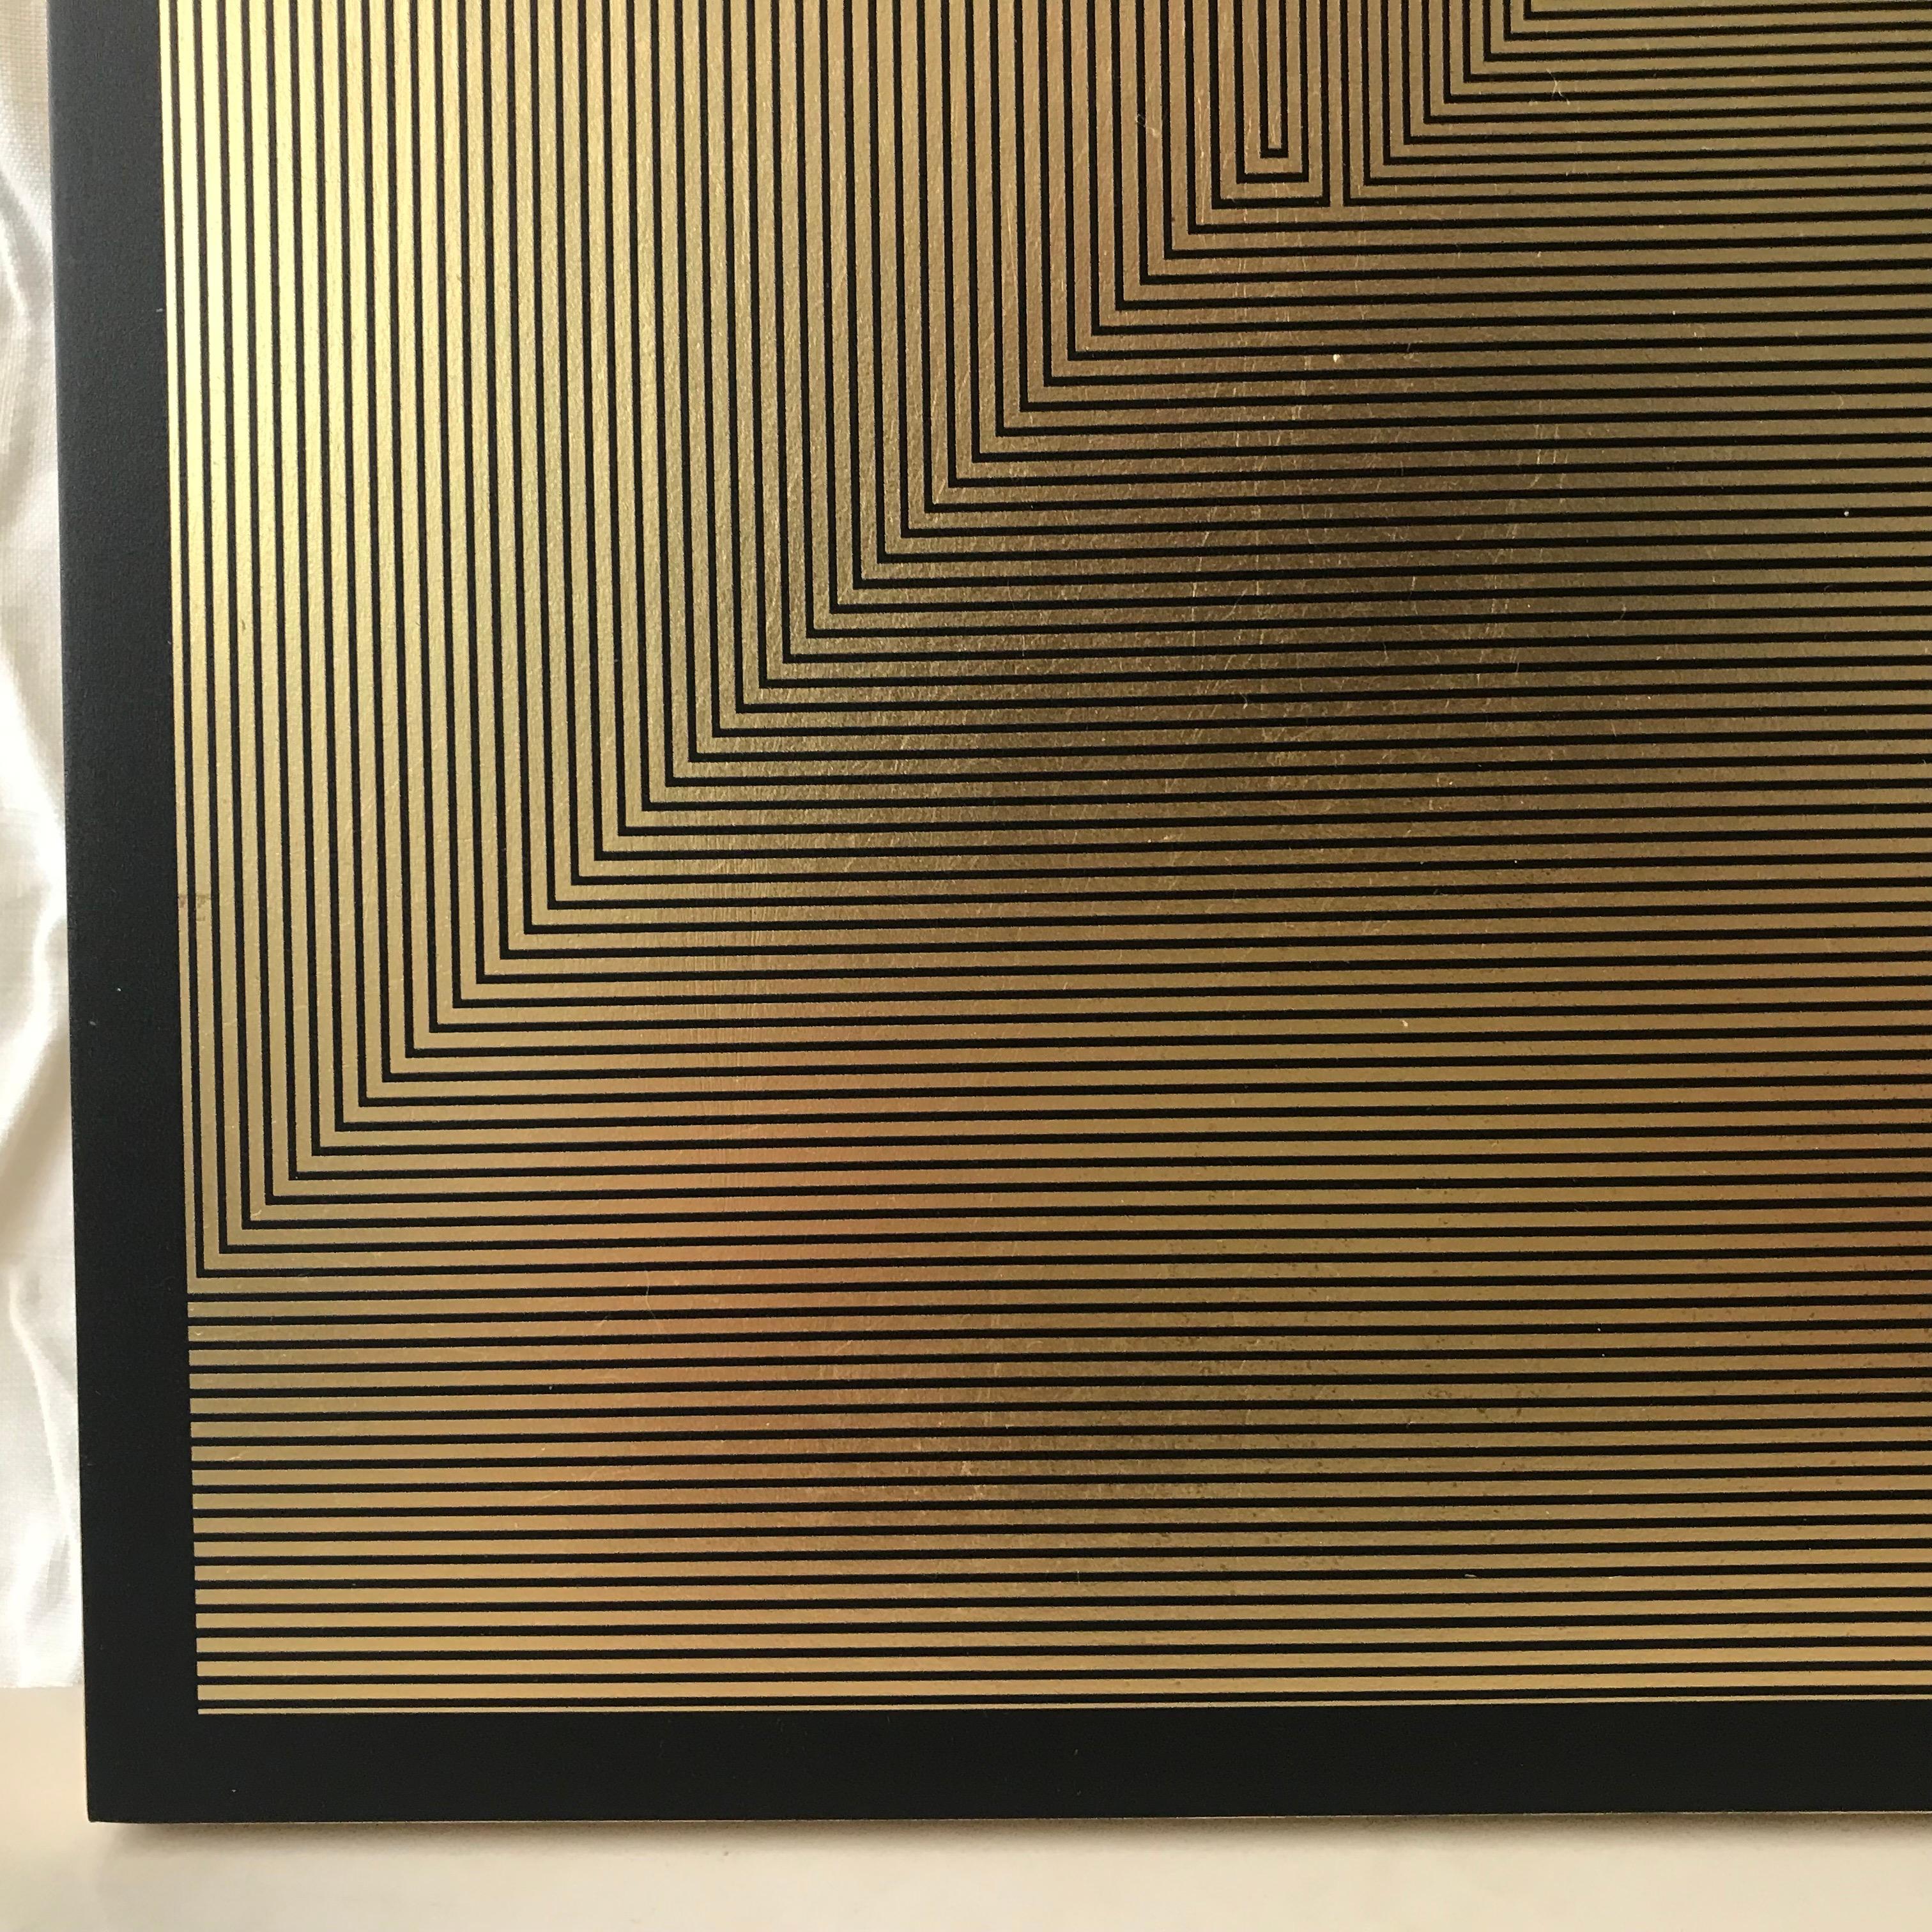 Untitled 6, 2019, Lacquer, Acrylic, Oil and Gold Leaf on MDF 2